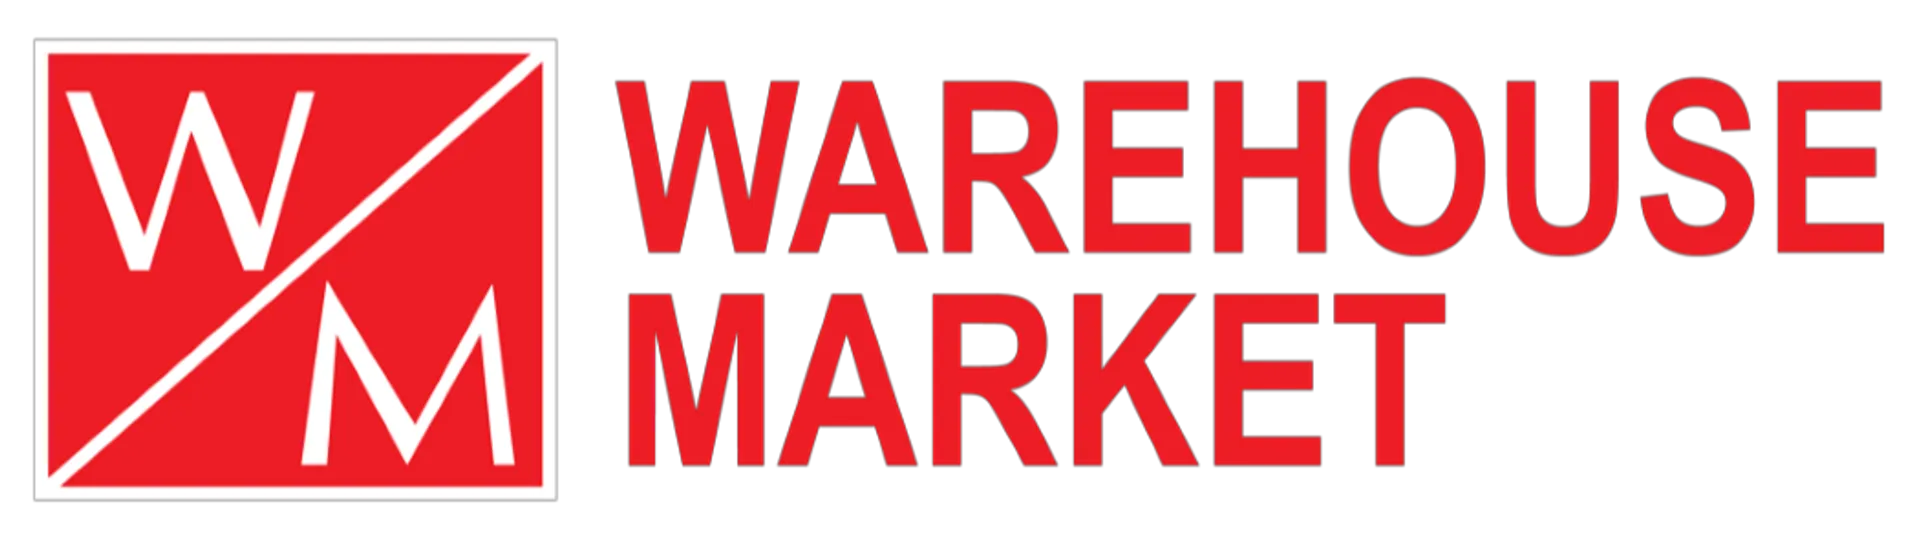 WAREHOUSE MARKET logo. Current weekly ad